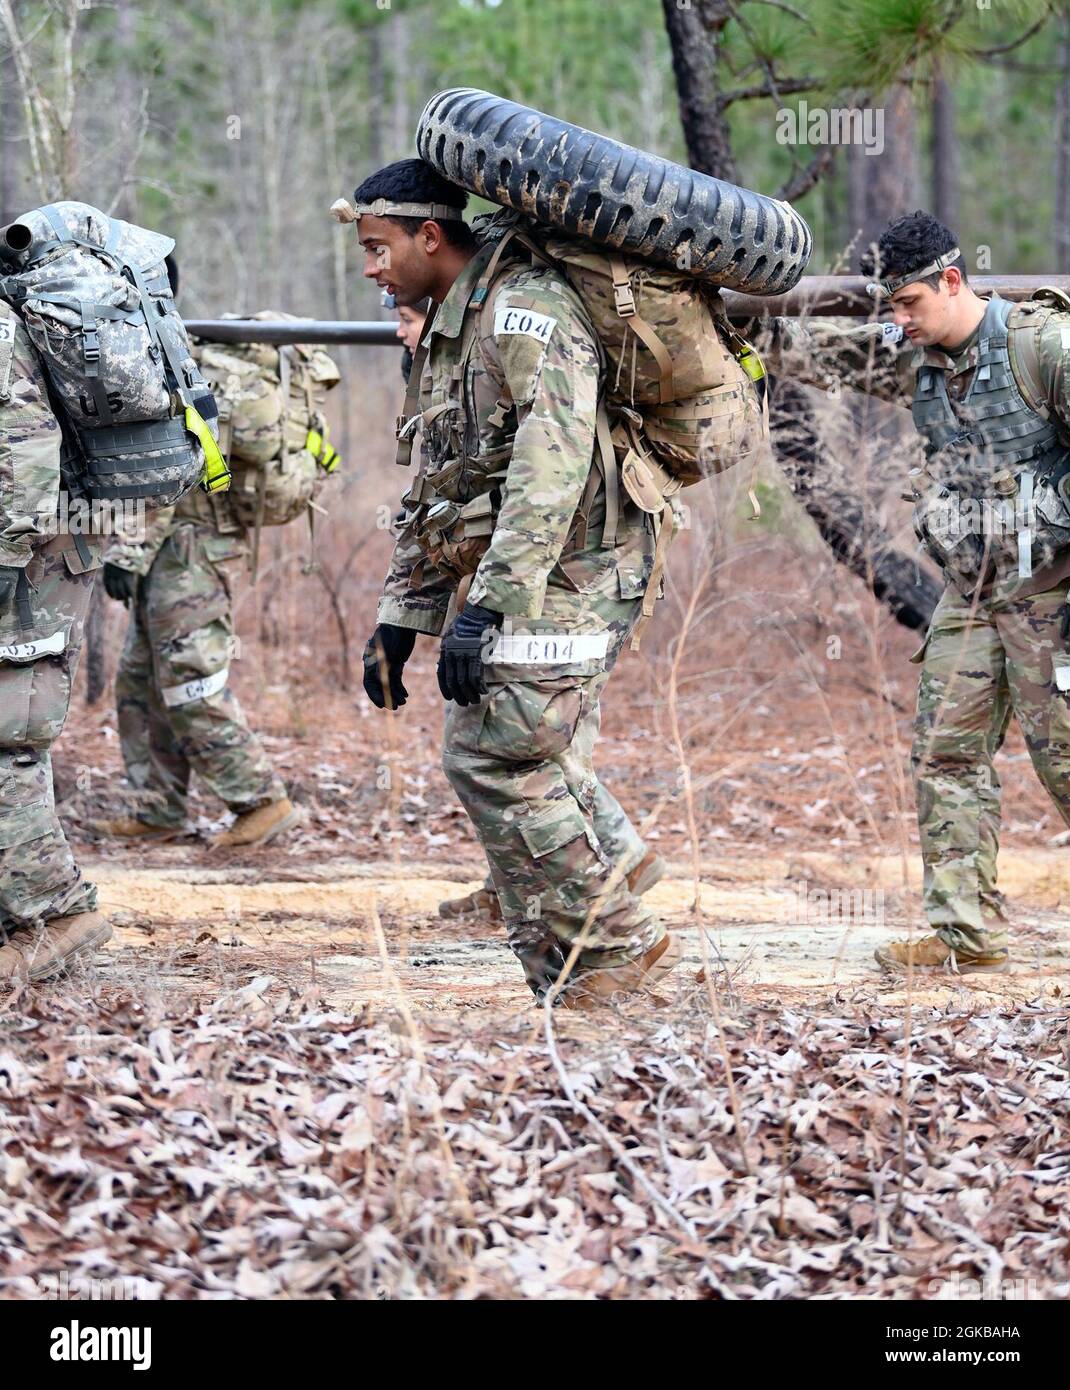 Civil Affairs candidates at the U.S. Army John F. Kennedy Special Warfare Center and School carry tires while participating in a team-building event during Civil Affairs Assessment and Selection (CAAS) at Camp Mackall, North Carolina, March 2, 2021. The candidates who attended the 10-day course were evaluated for trainability and suitability to attend the Civil Affairs Team Leader or the Civil Affairs Noncommissioned Officer pathway and for the attributes and competencies required to be a member of a Civil Affairs Team. Stock Photo